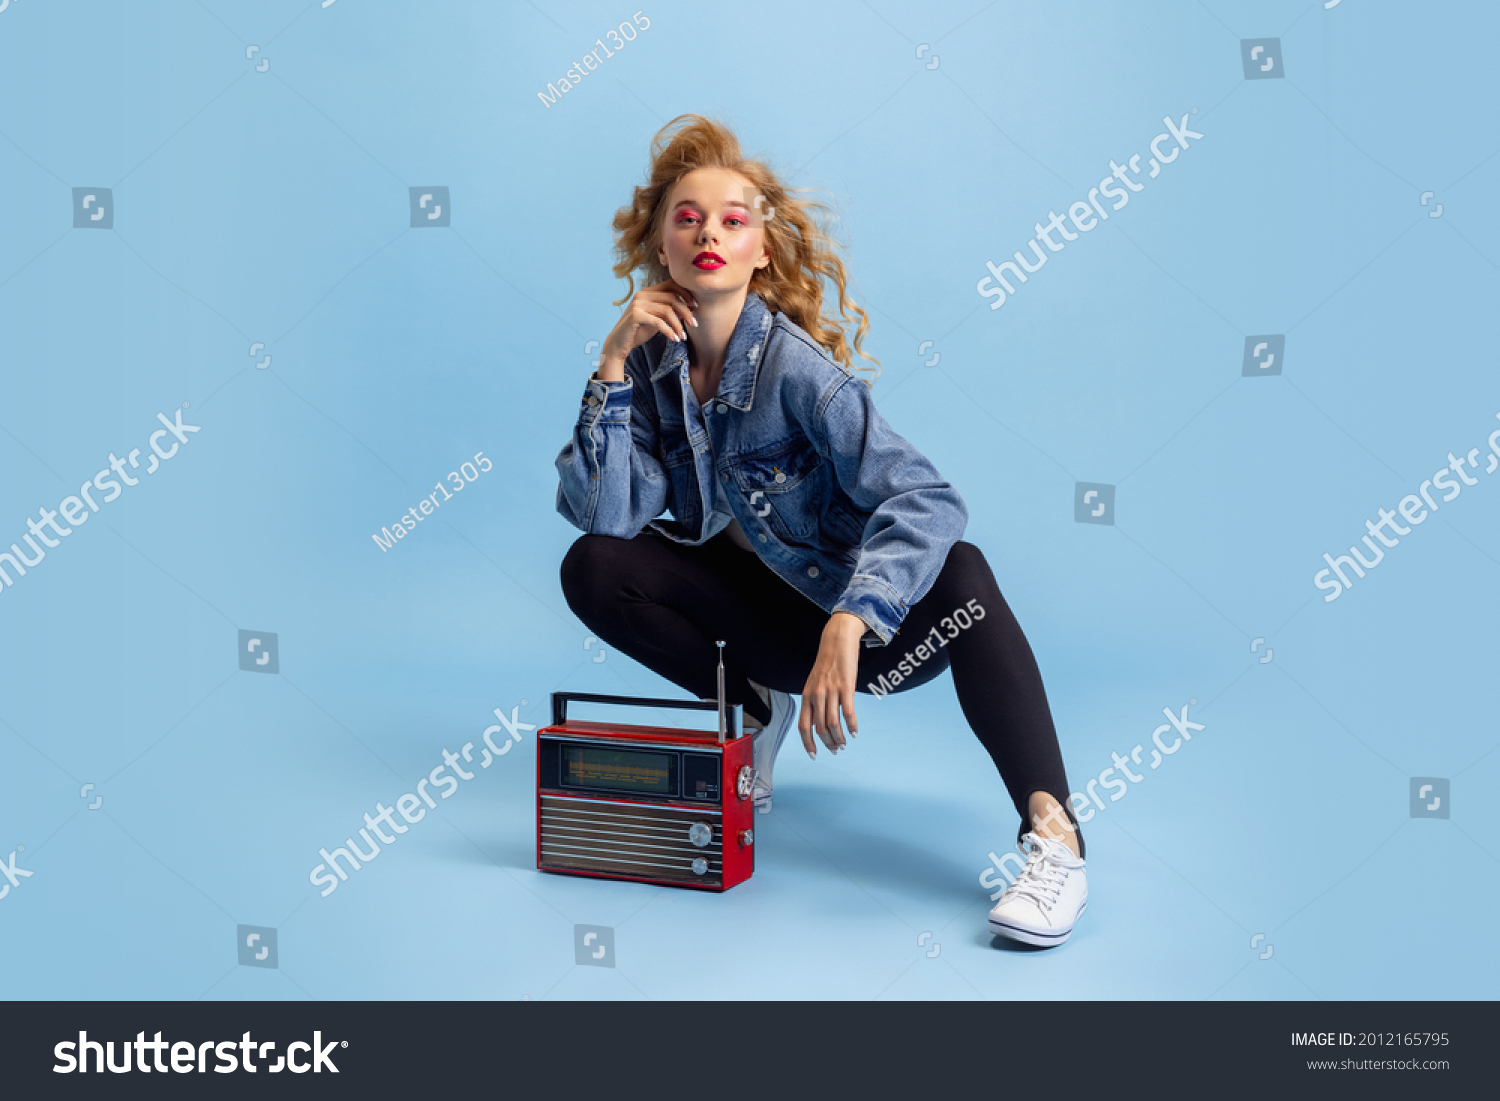 Disco, party time. Portrait of attractive woman in retro 90s fashion style, outfit isolated over blue studio background. Concept of eras comparison, beauty, fashion and youth. #2012165795